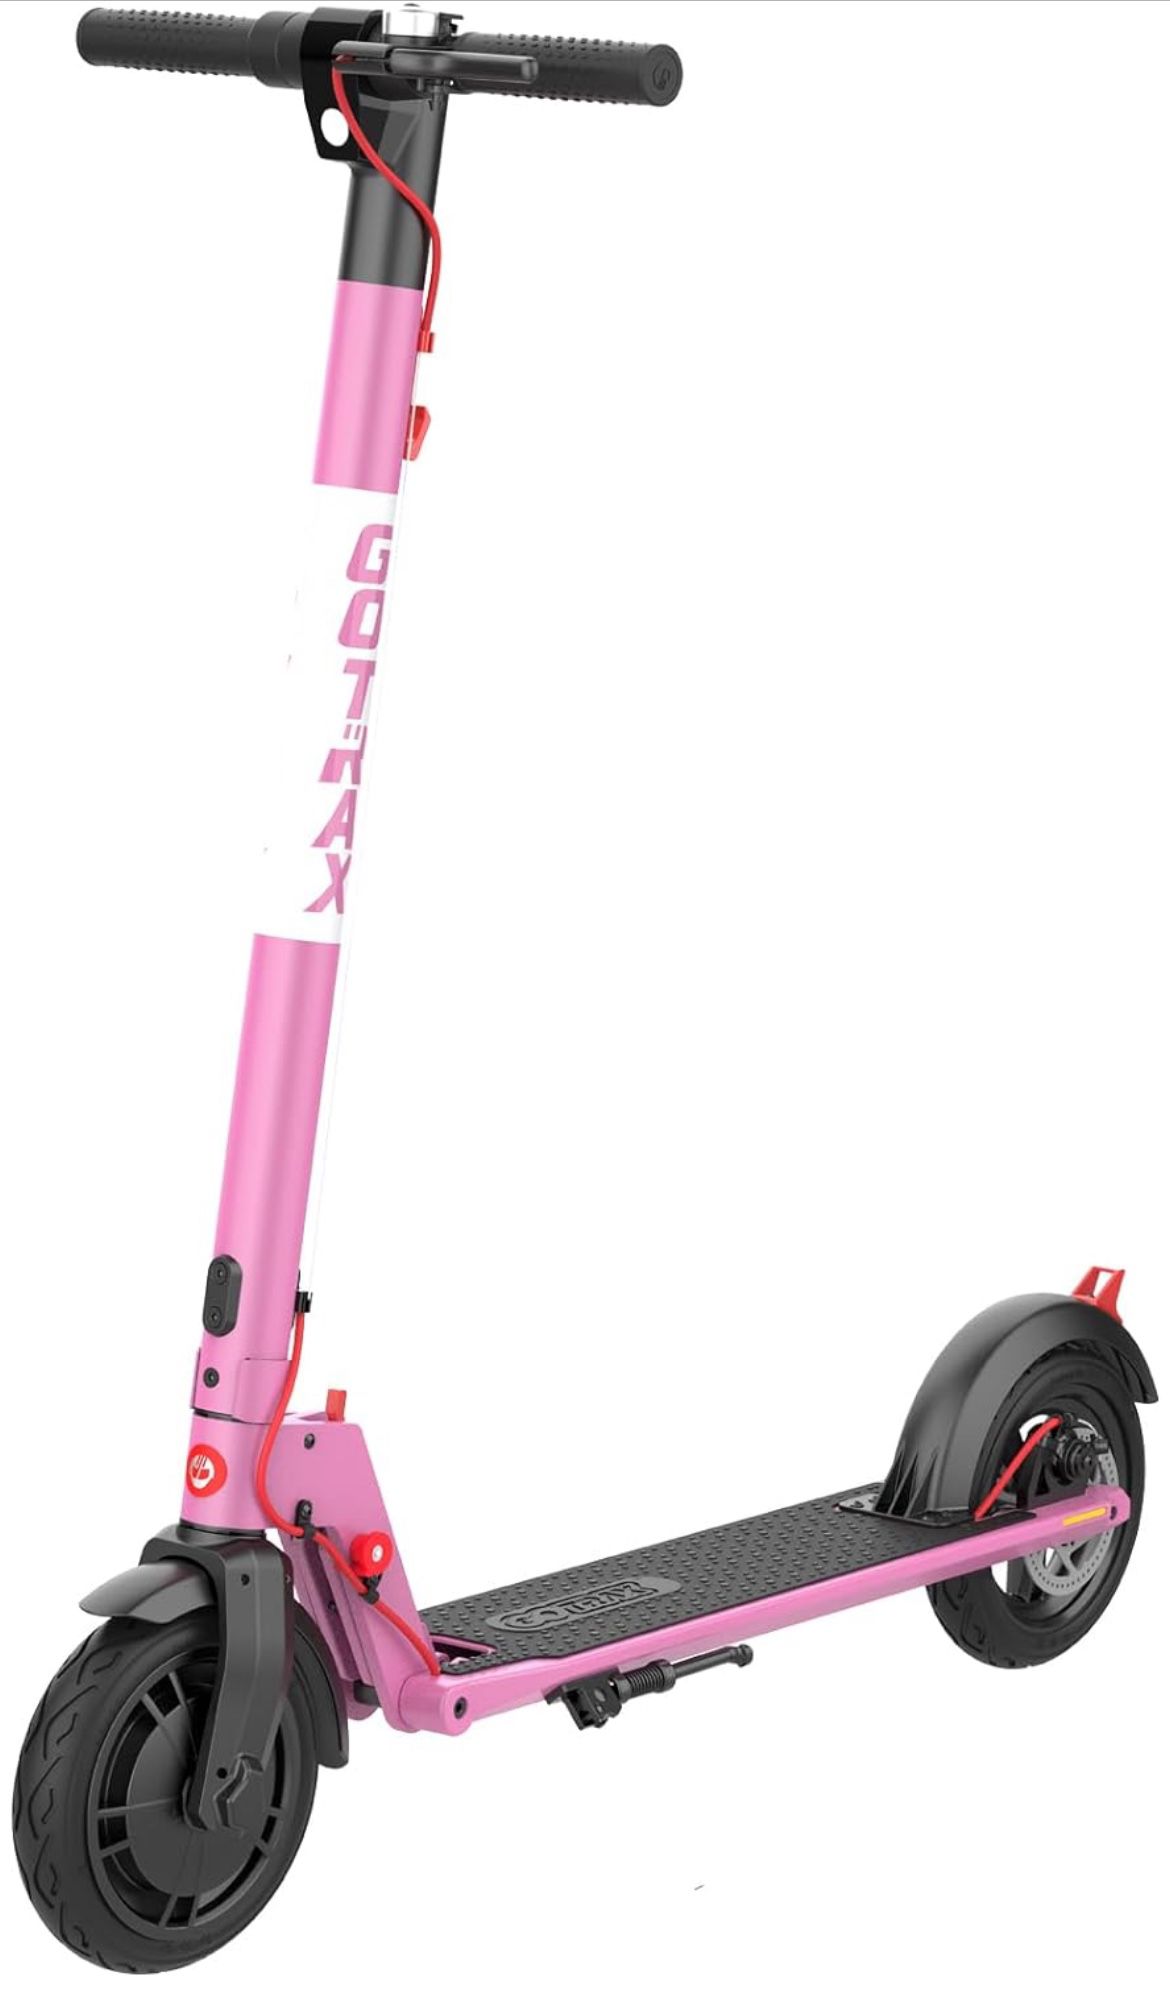 Gotrax GXL V2 Series Electric Scooter